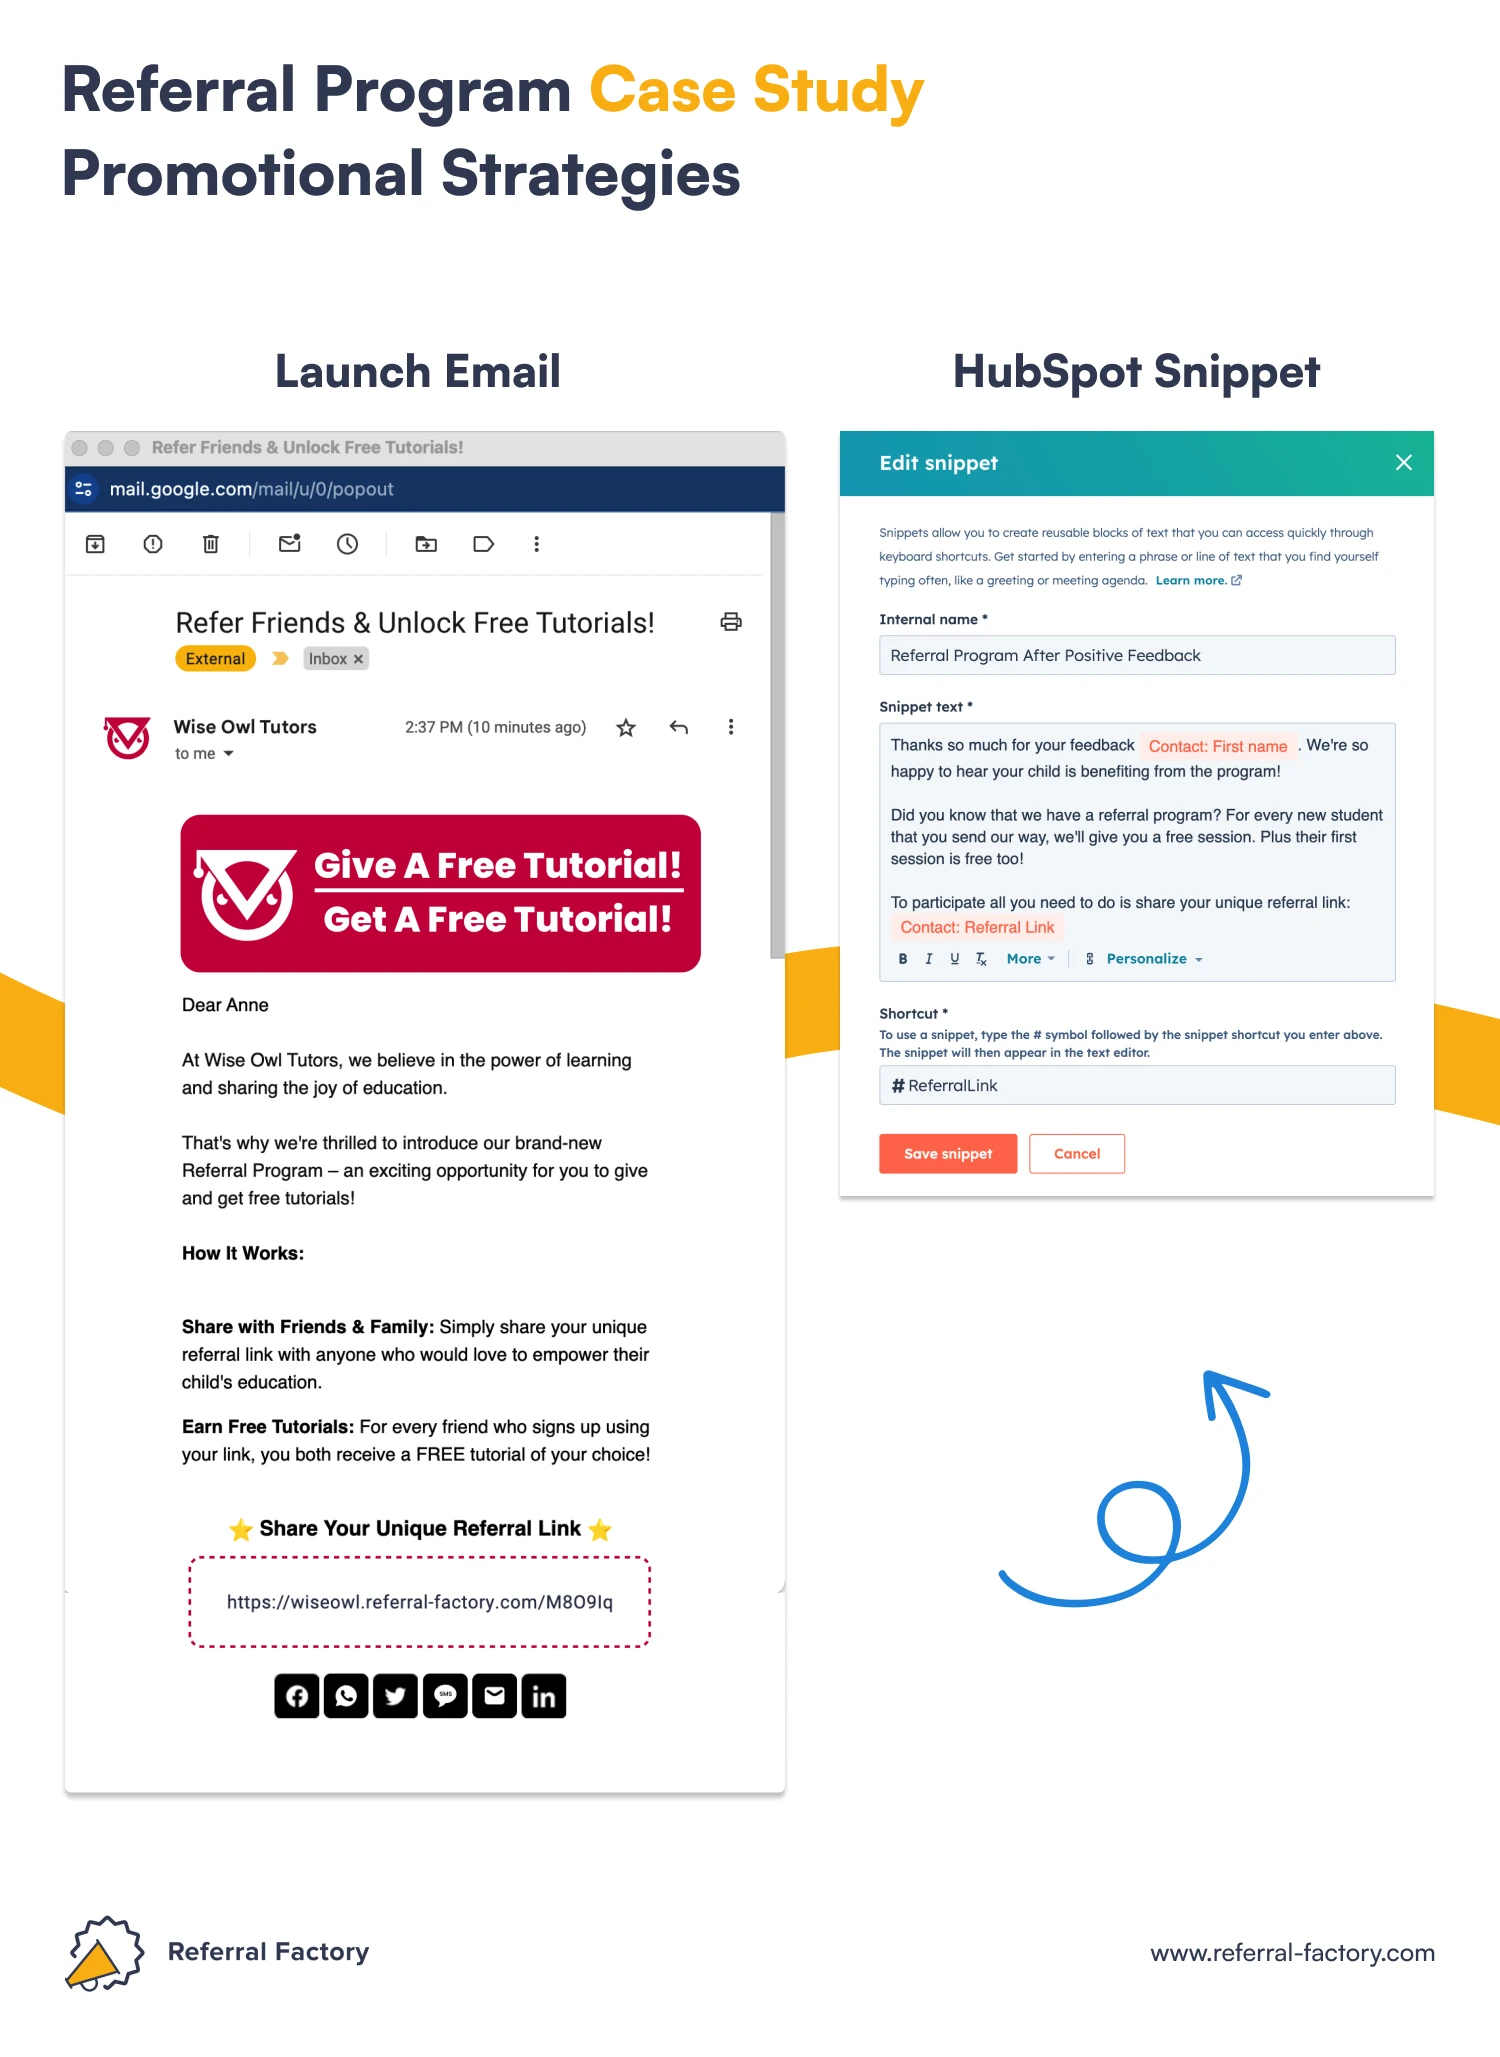 promotional strategies case study education industry referral links hubspot